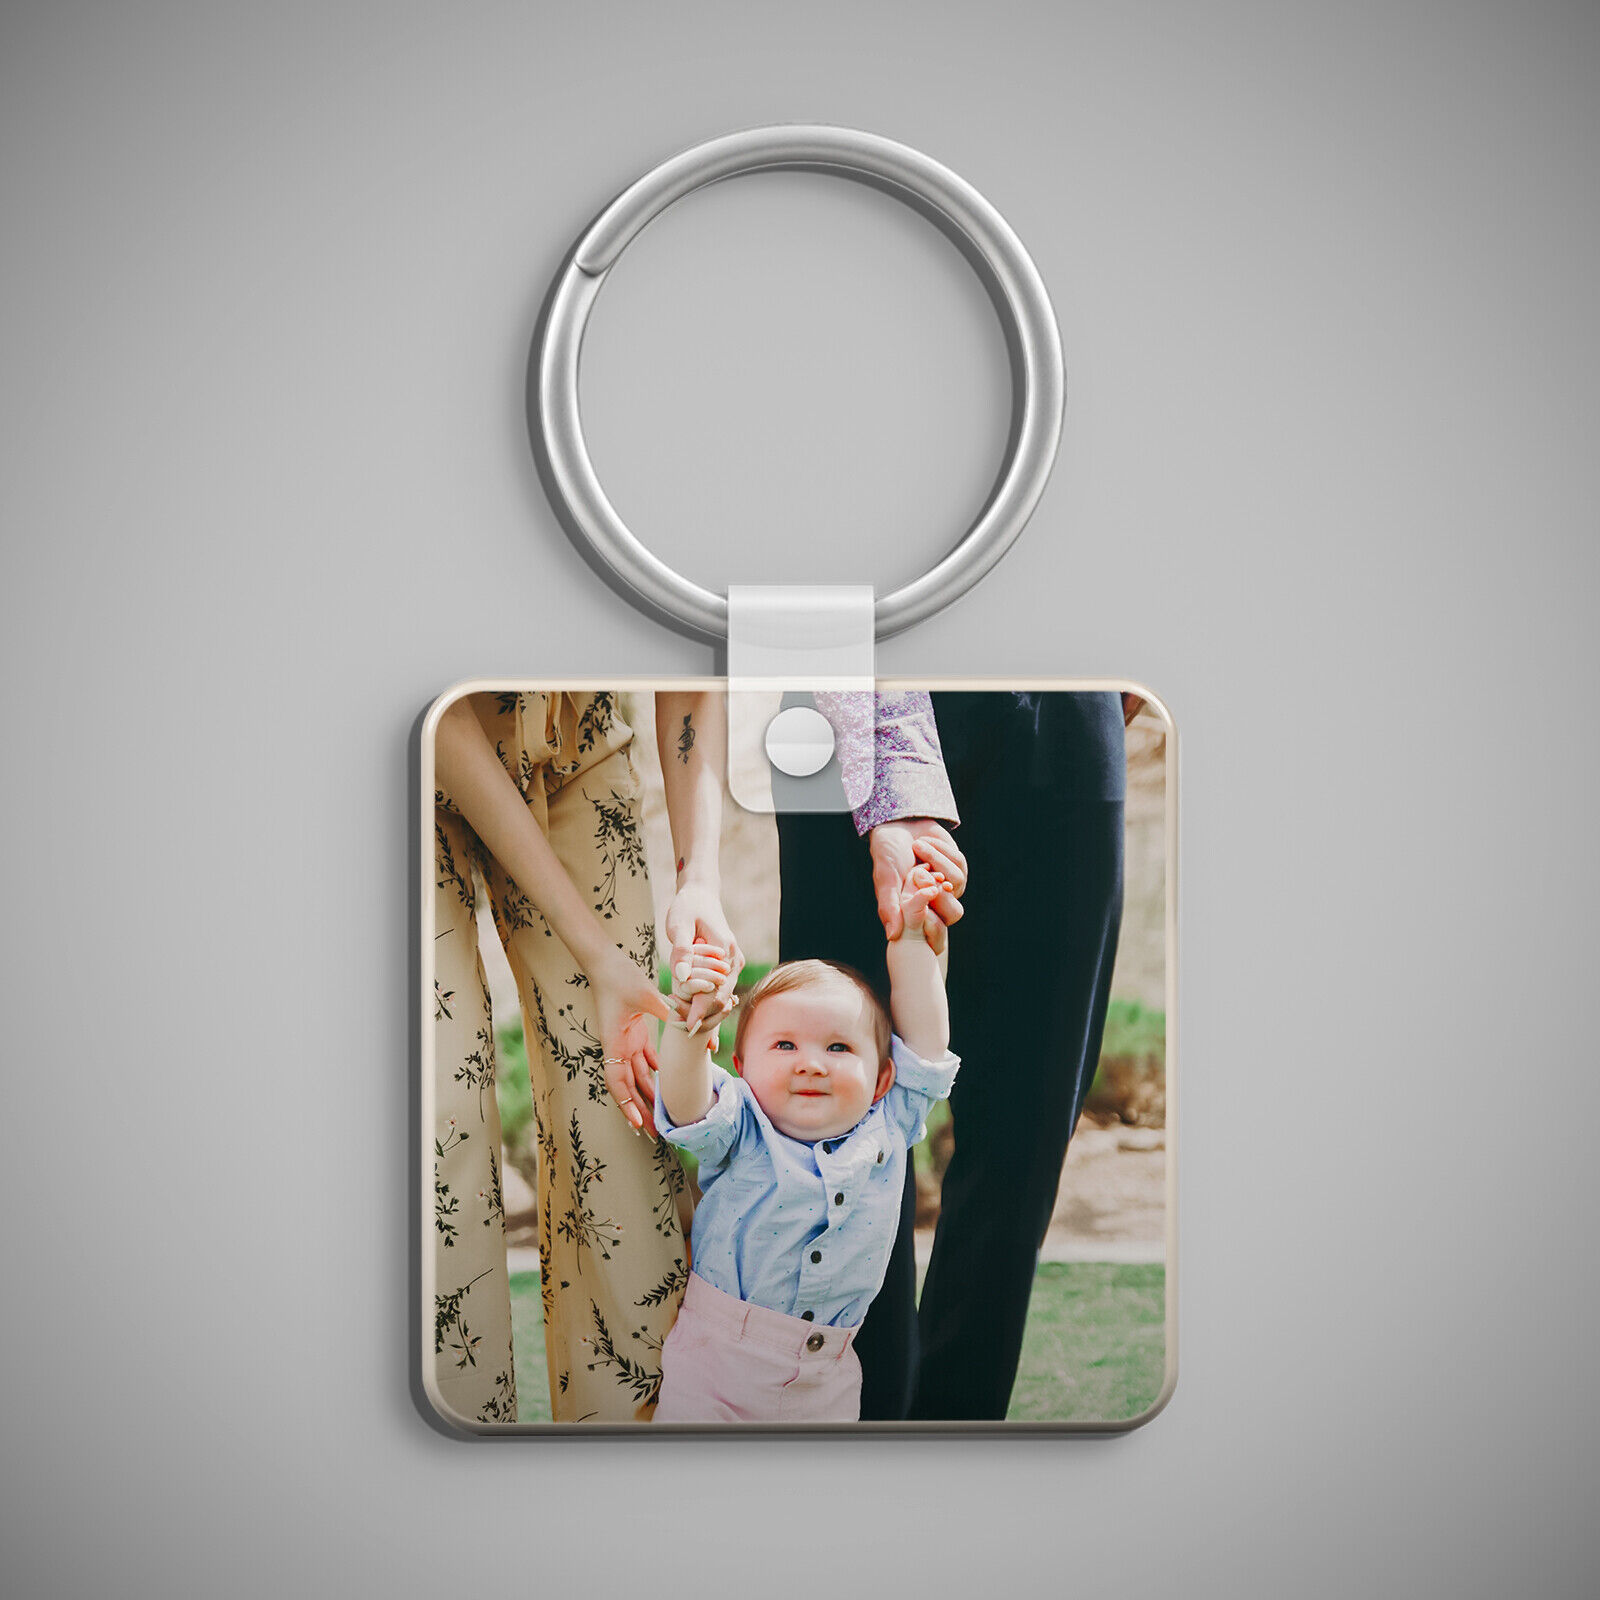 Personalized Custom Keychain Photo Picture Text Image Couple Keyring Gift Us